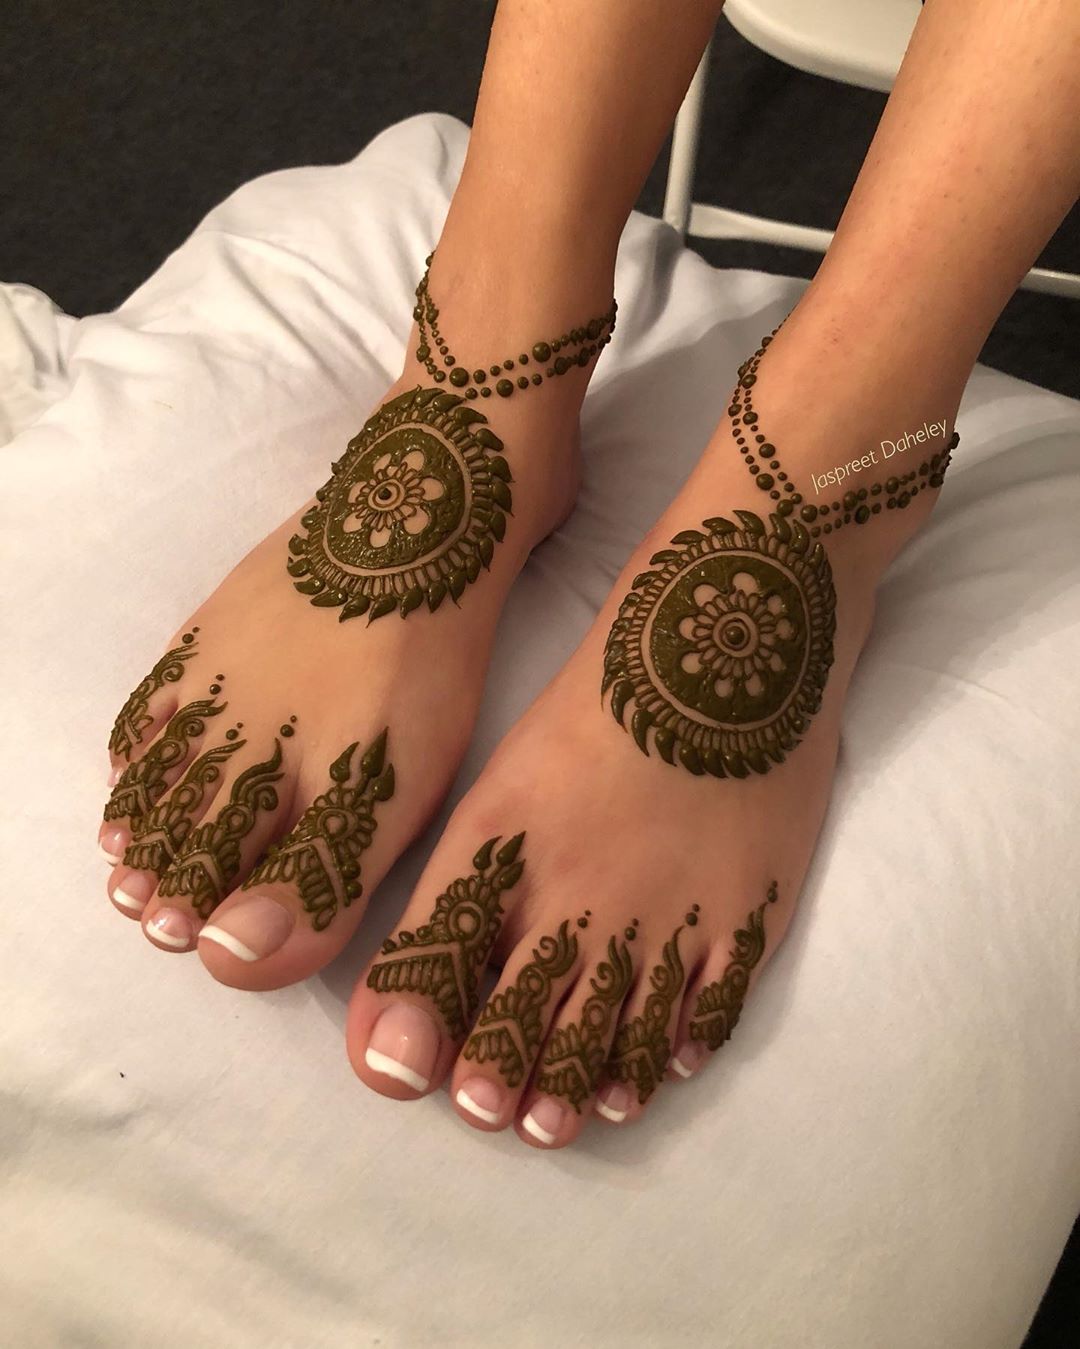 Why do people put henna on their feet?